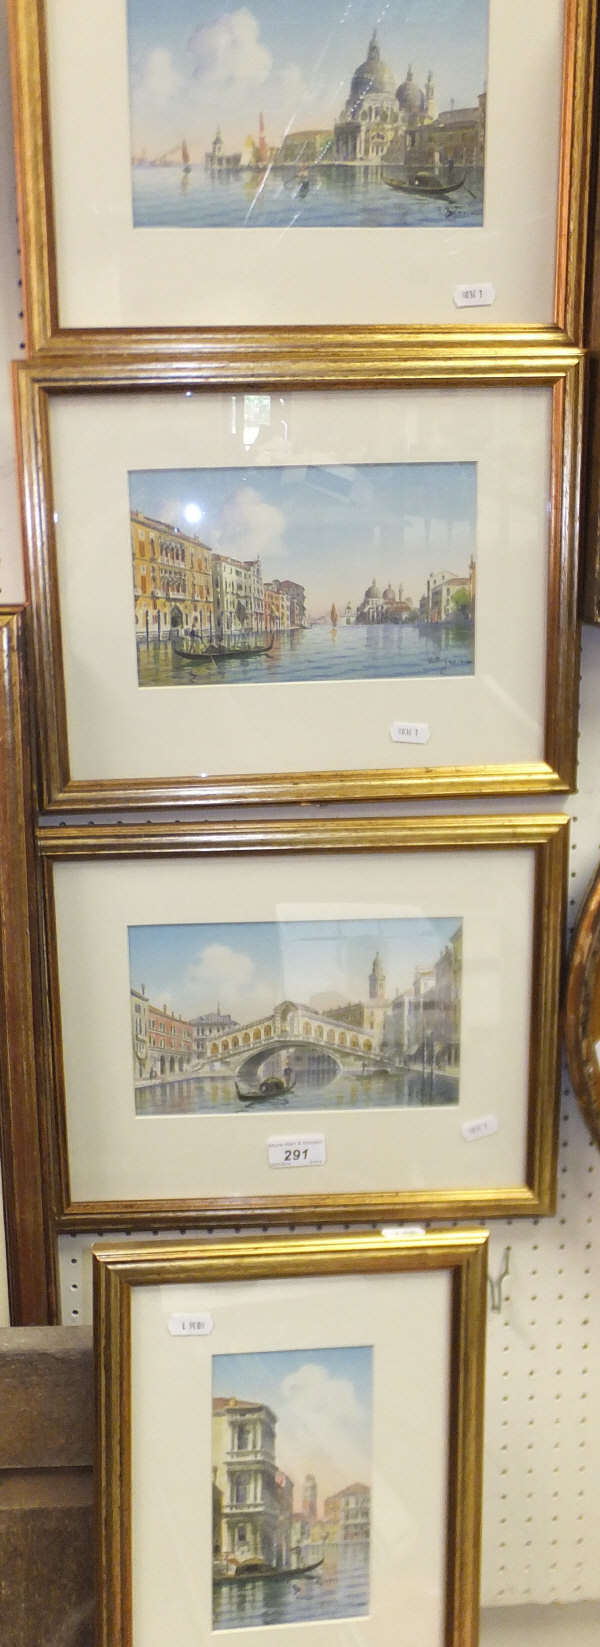 U. ONGANI "Venetian scenes with gondolas", a collection of four watercolours, each signed bottom